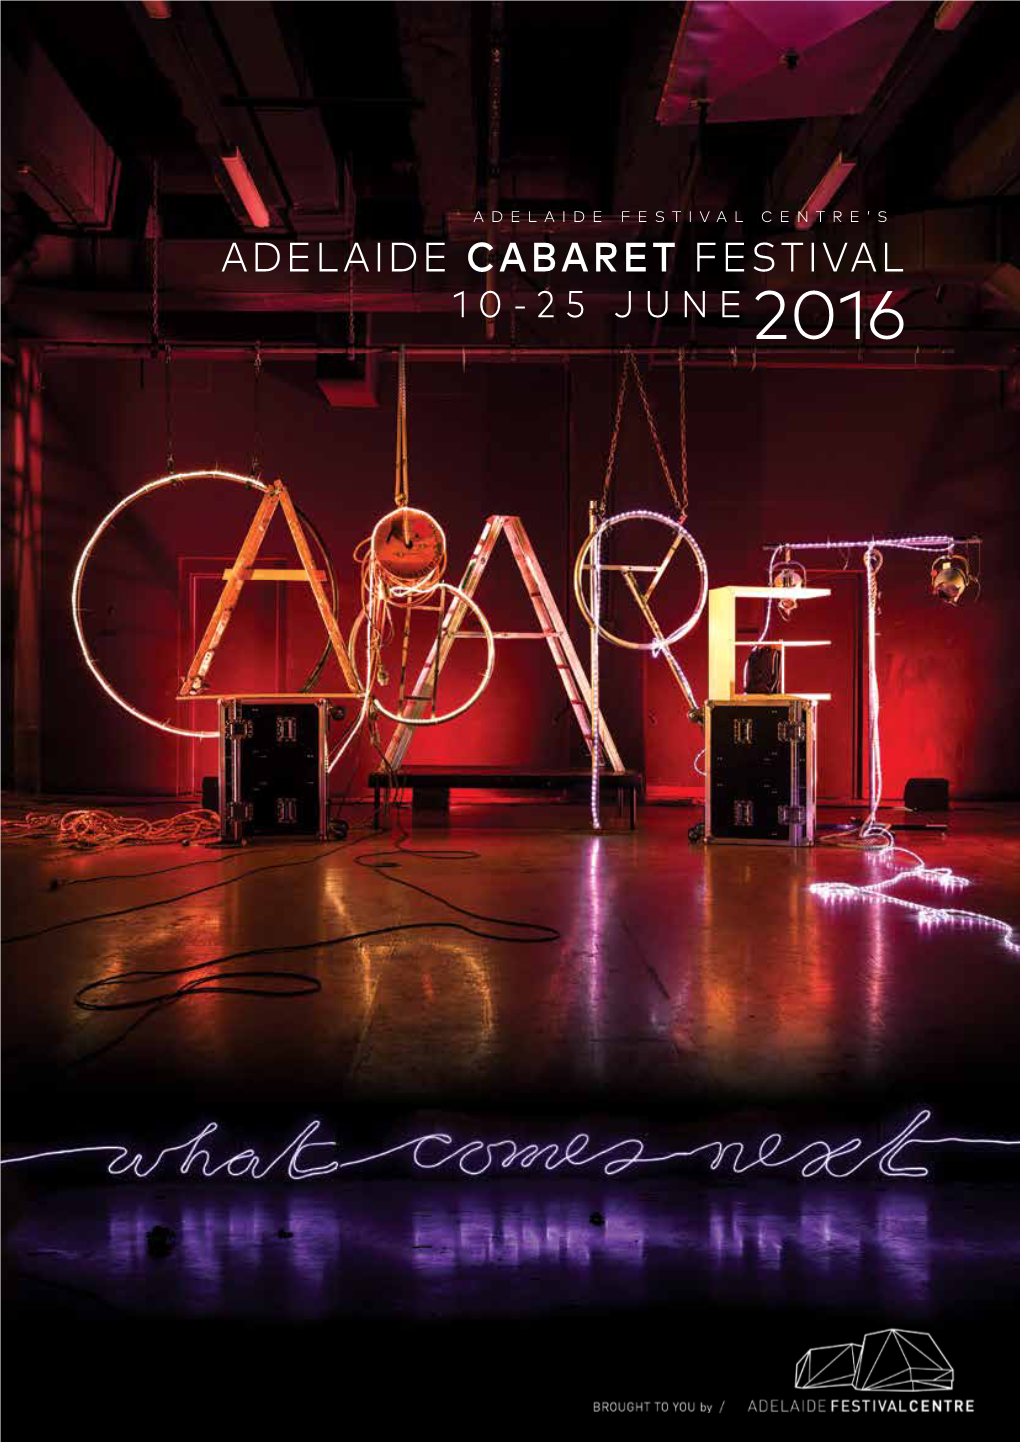 CABARET DINNER Hosted by EDDIE PERFECT the OLD & the NEW 25